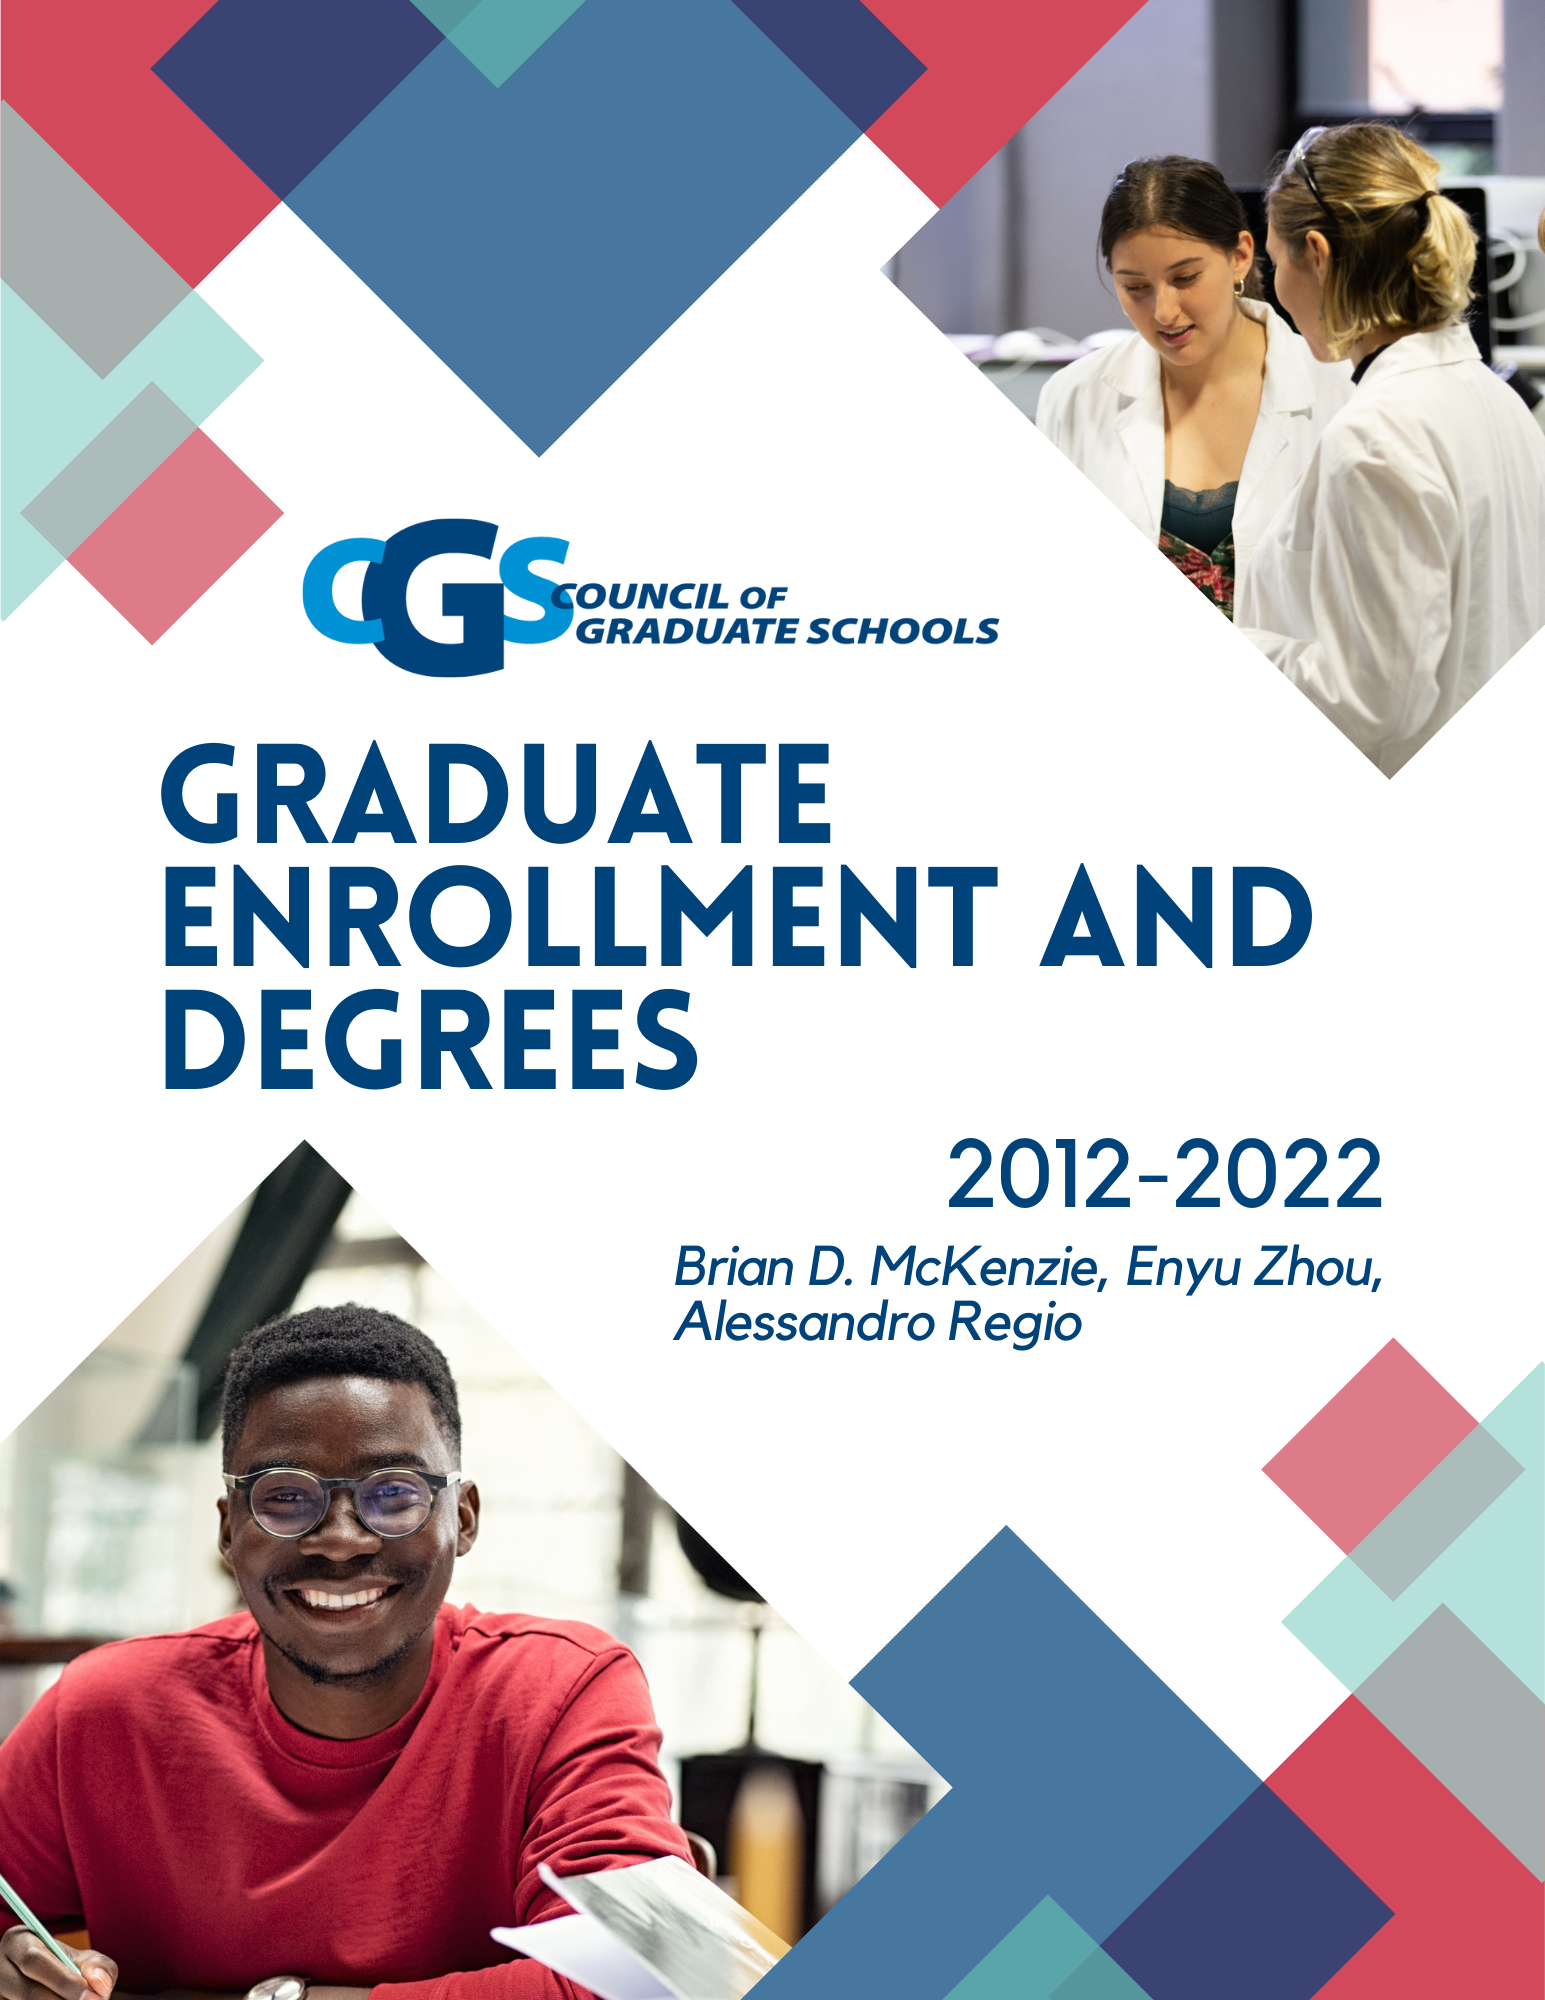 The National Voice for Graduate Education - CGS